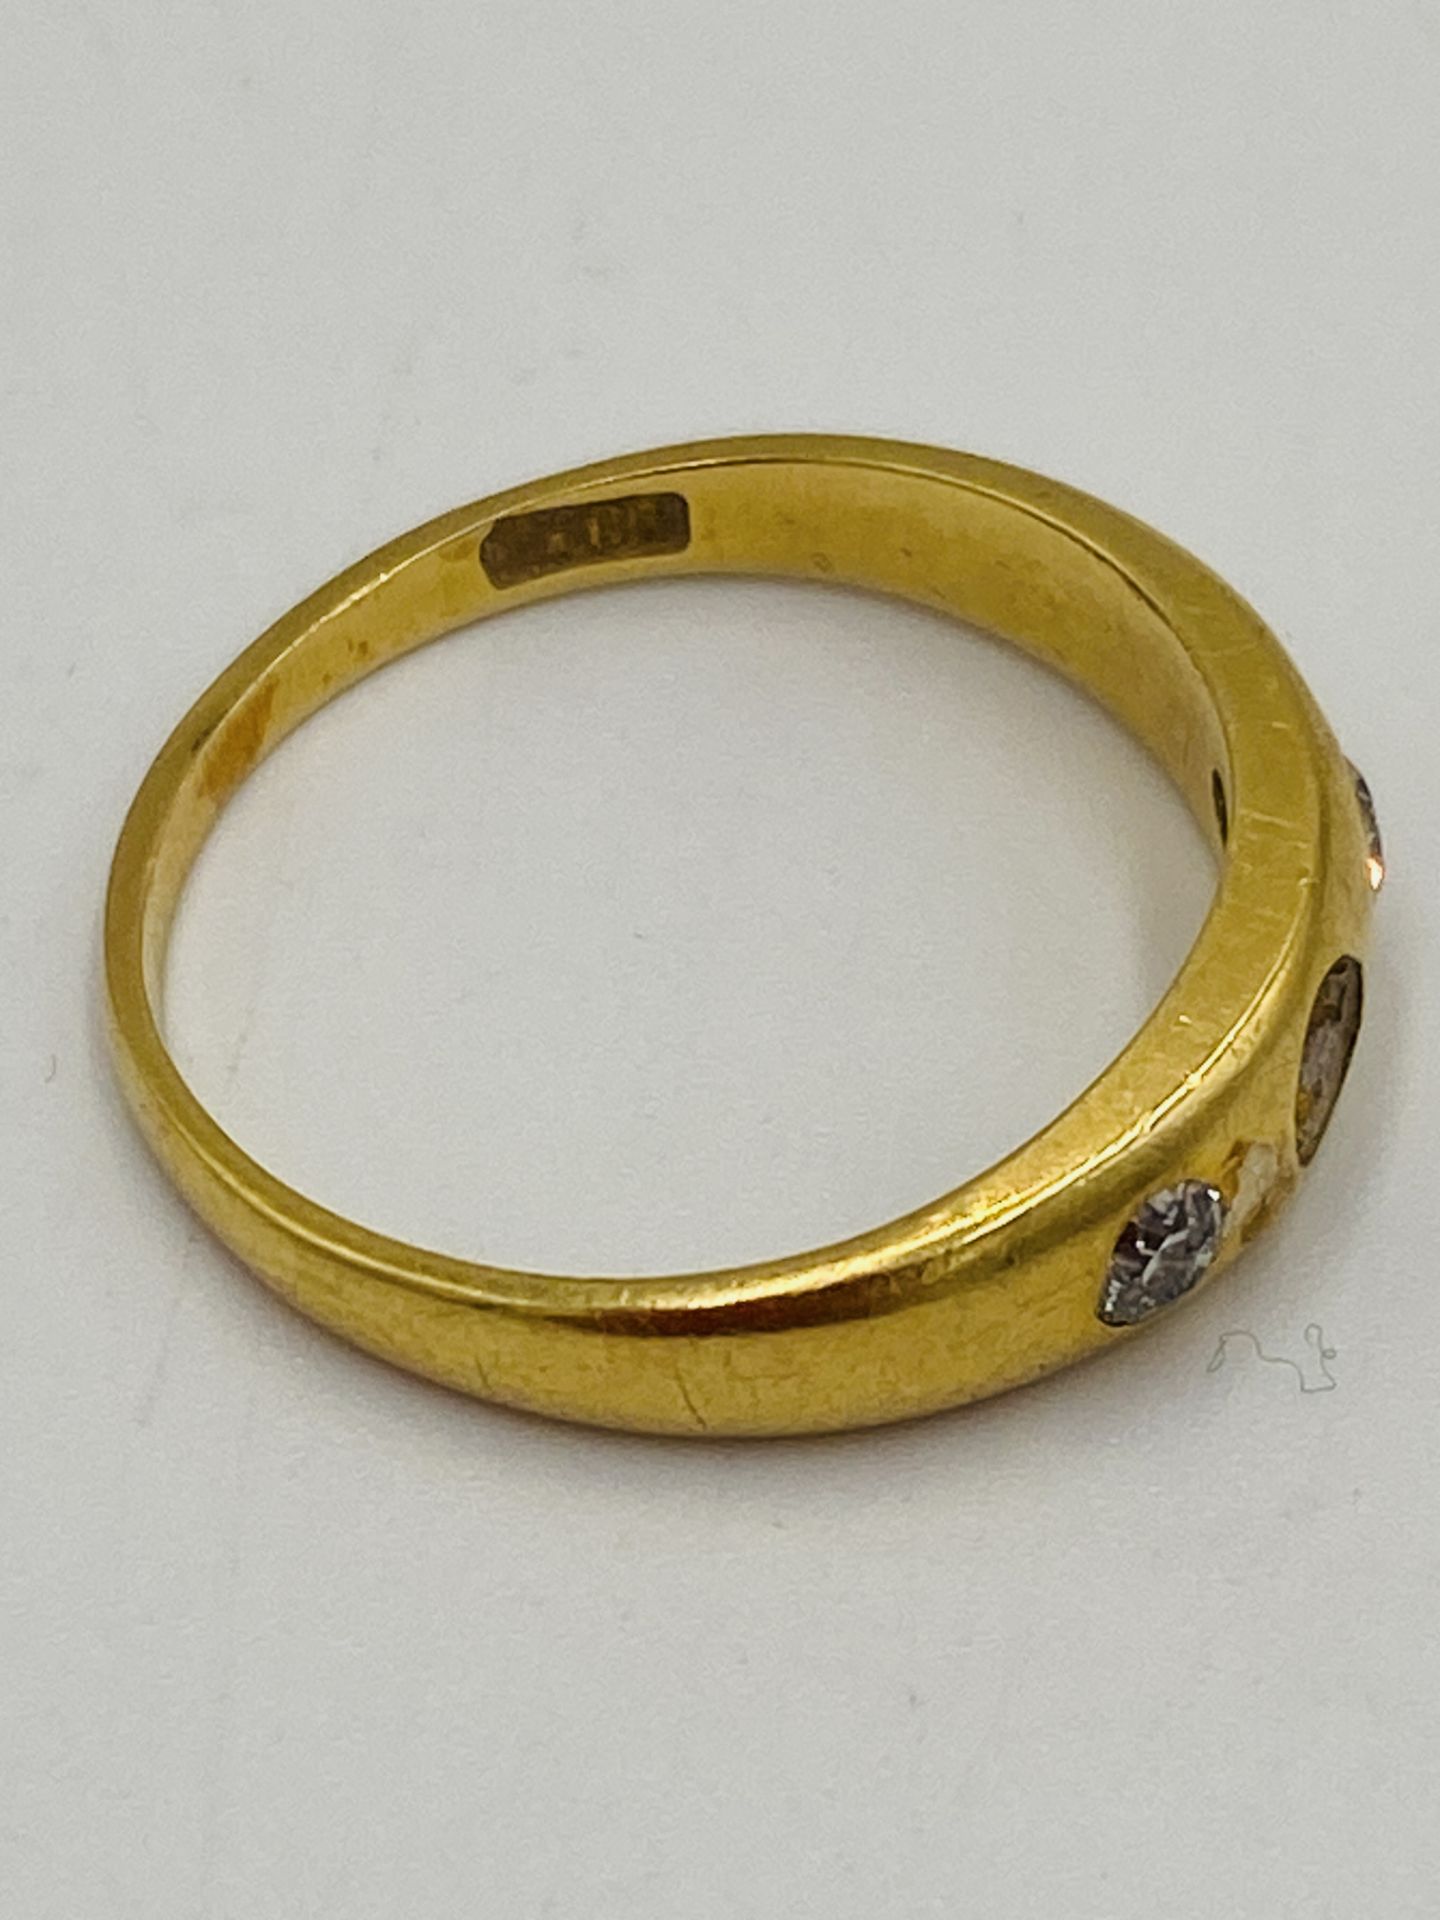 18ct gold ring - Image 4 of 6